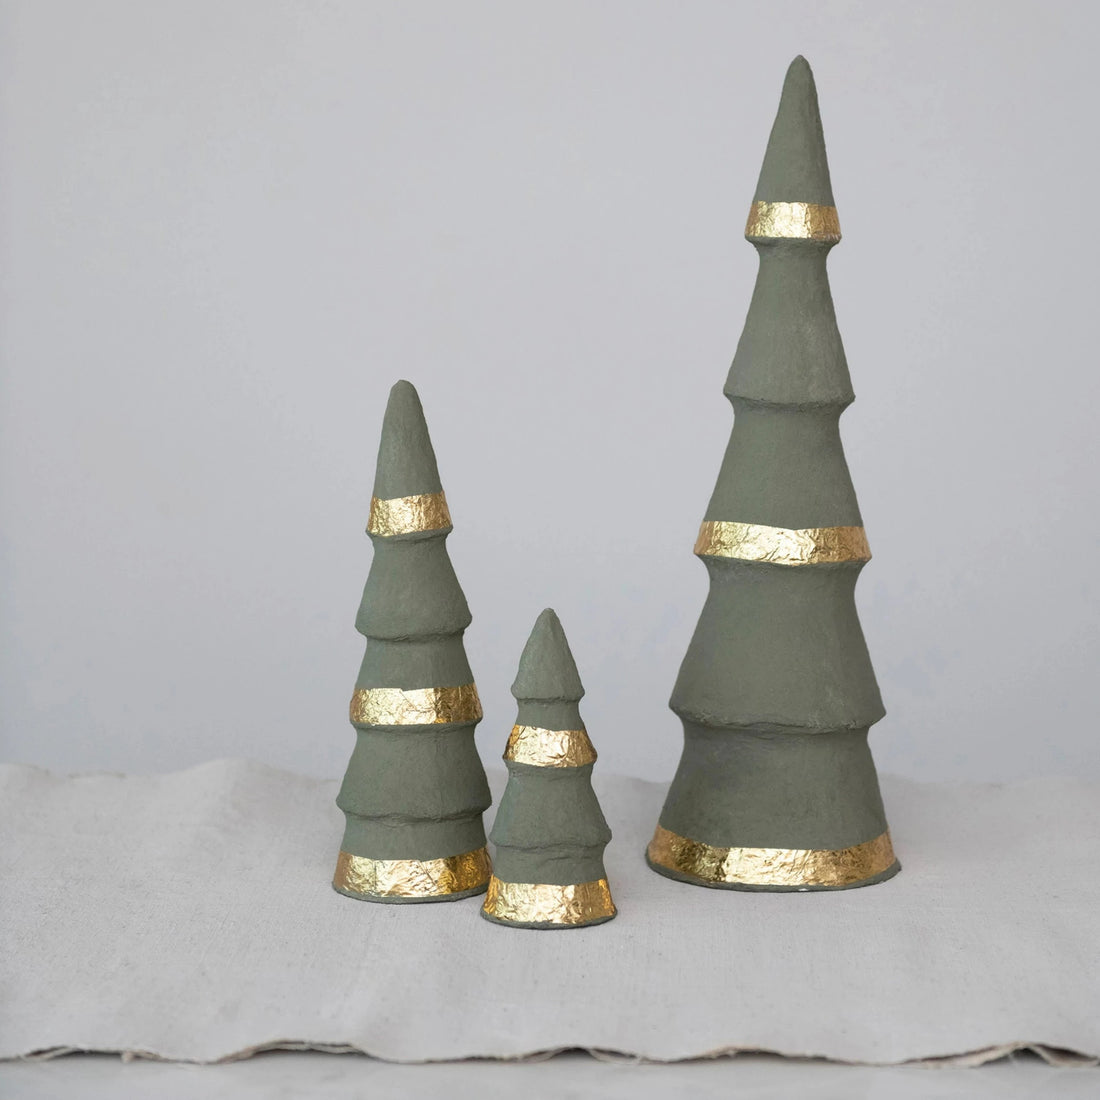 Handmade Paper Mache Trees with Gold Foil, Grey, Set of 3